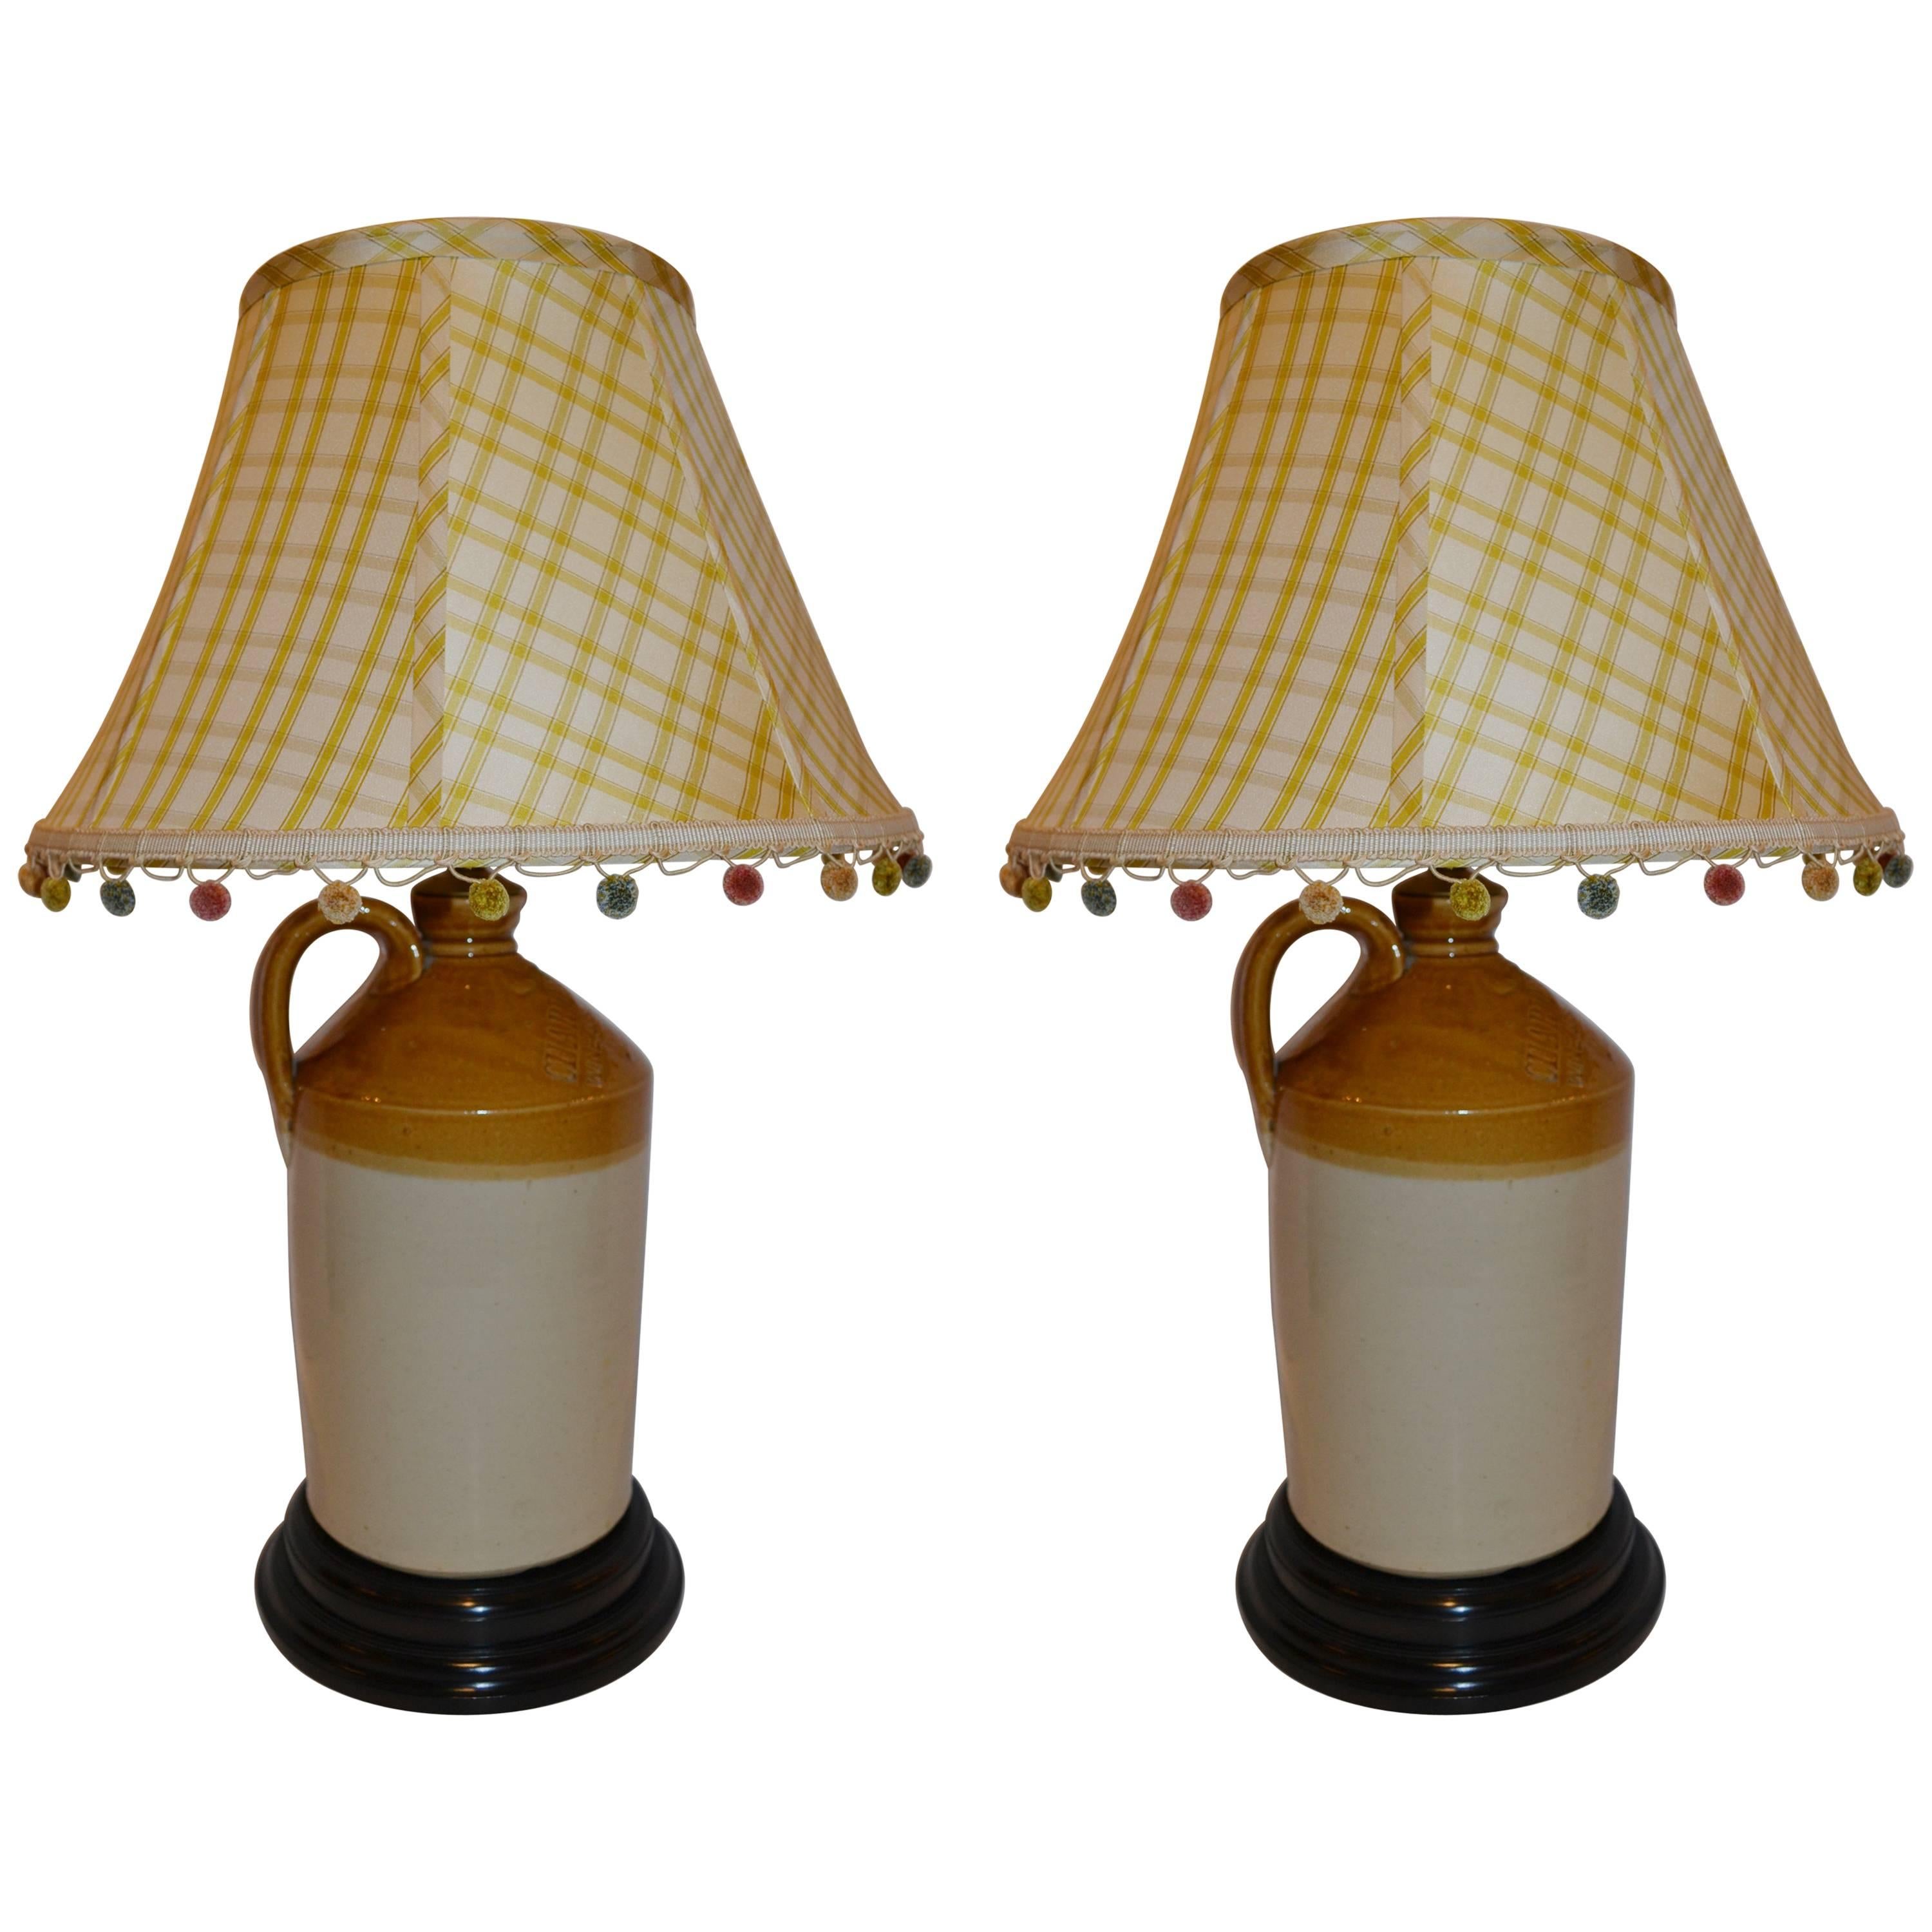 Pair of Stoneware Jugs Converted to Lamps